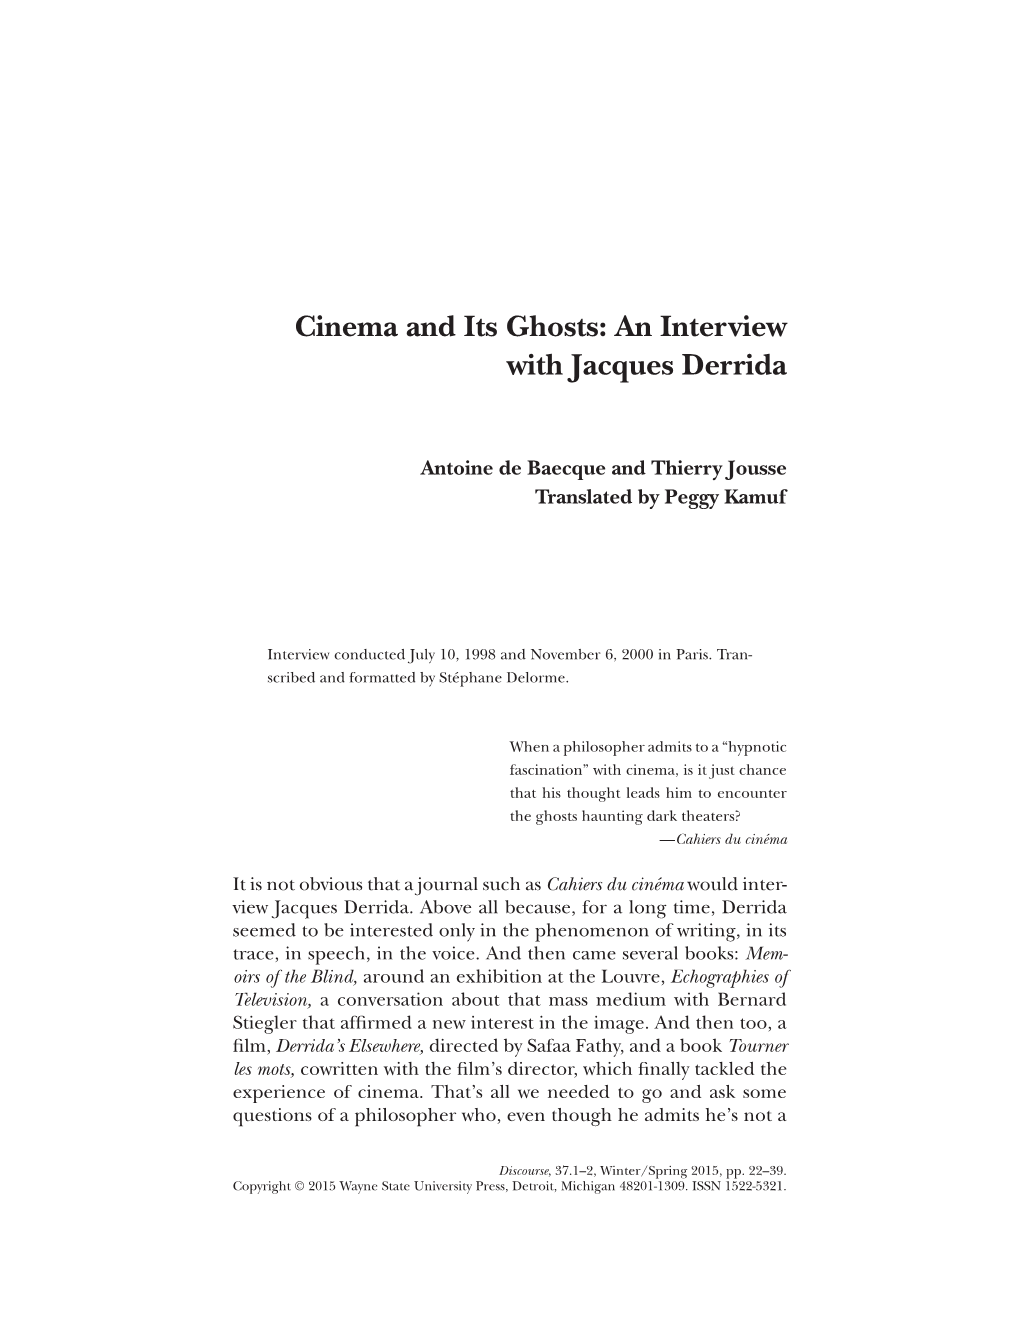 "Cinema and Its Ghosts: an Interview with Jacques Derrida" (2015)